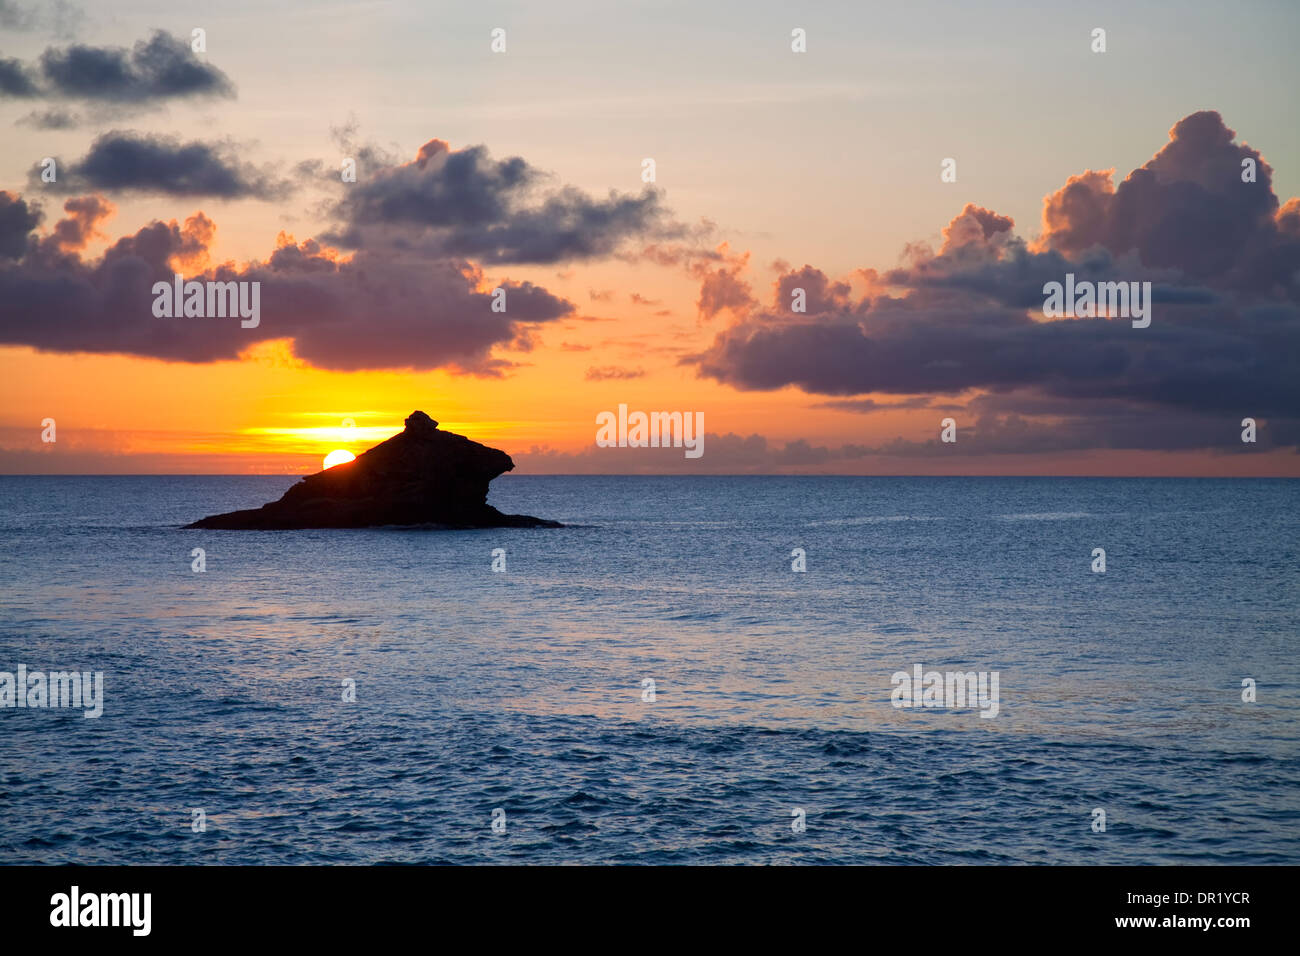 Hawksbill Rock located on the shores of Antigua in the Caribbean. Stock Photo